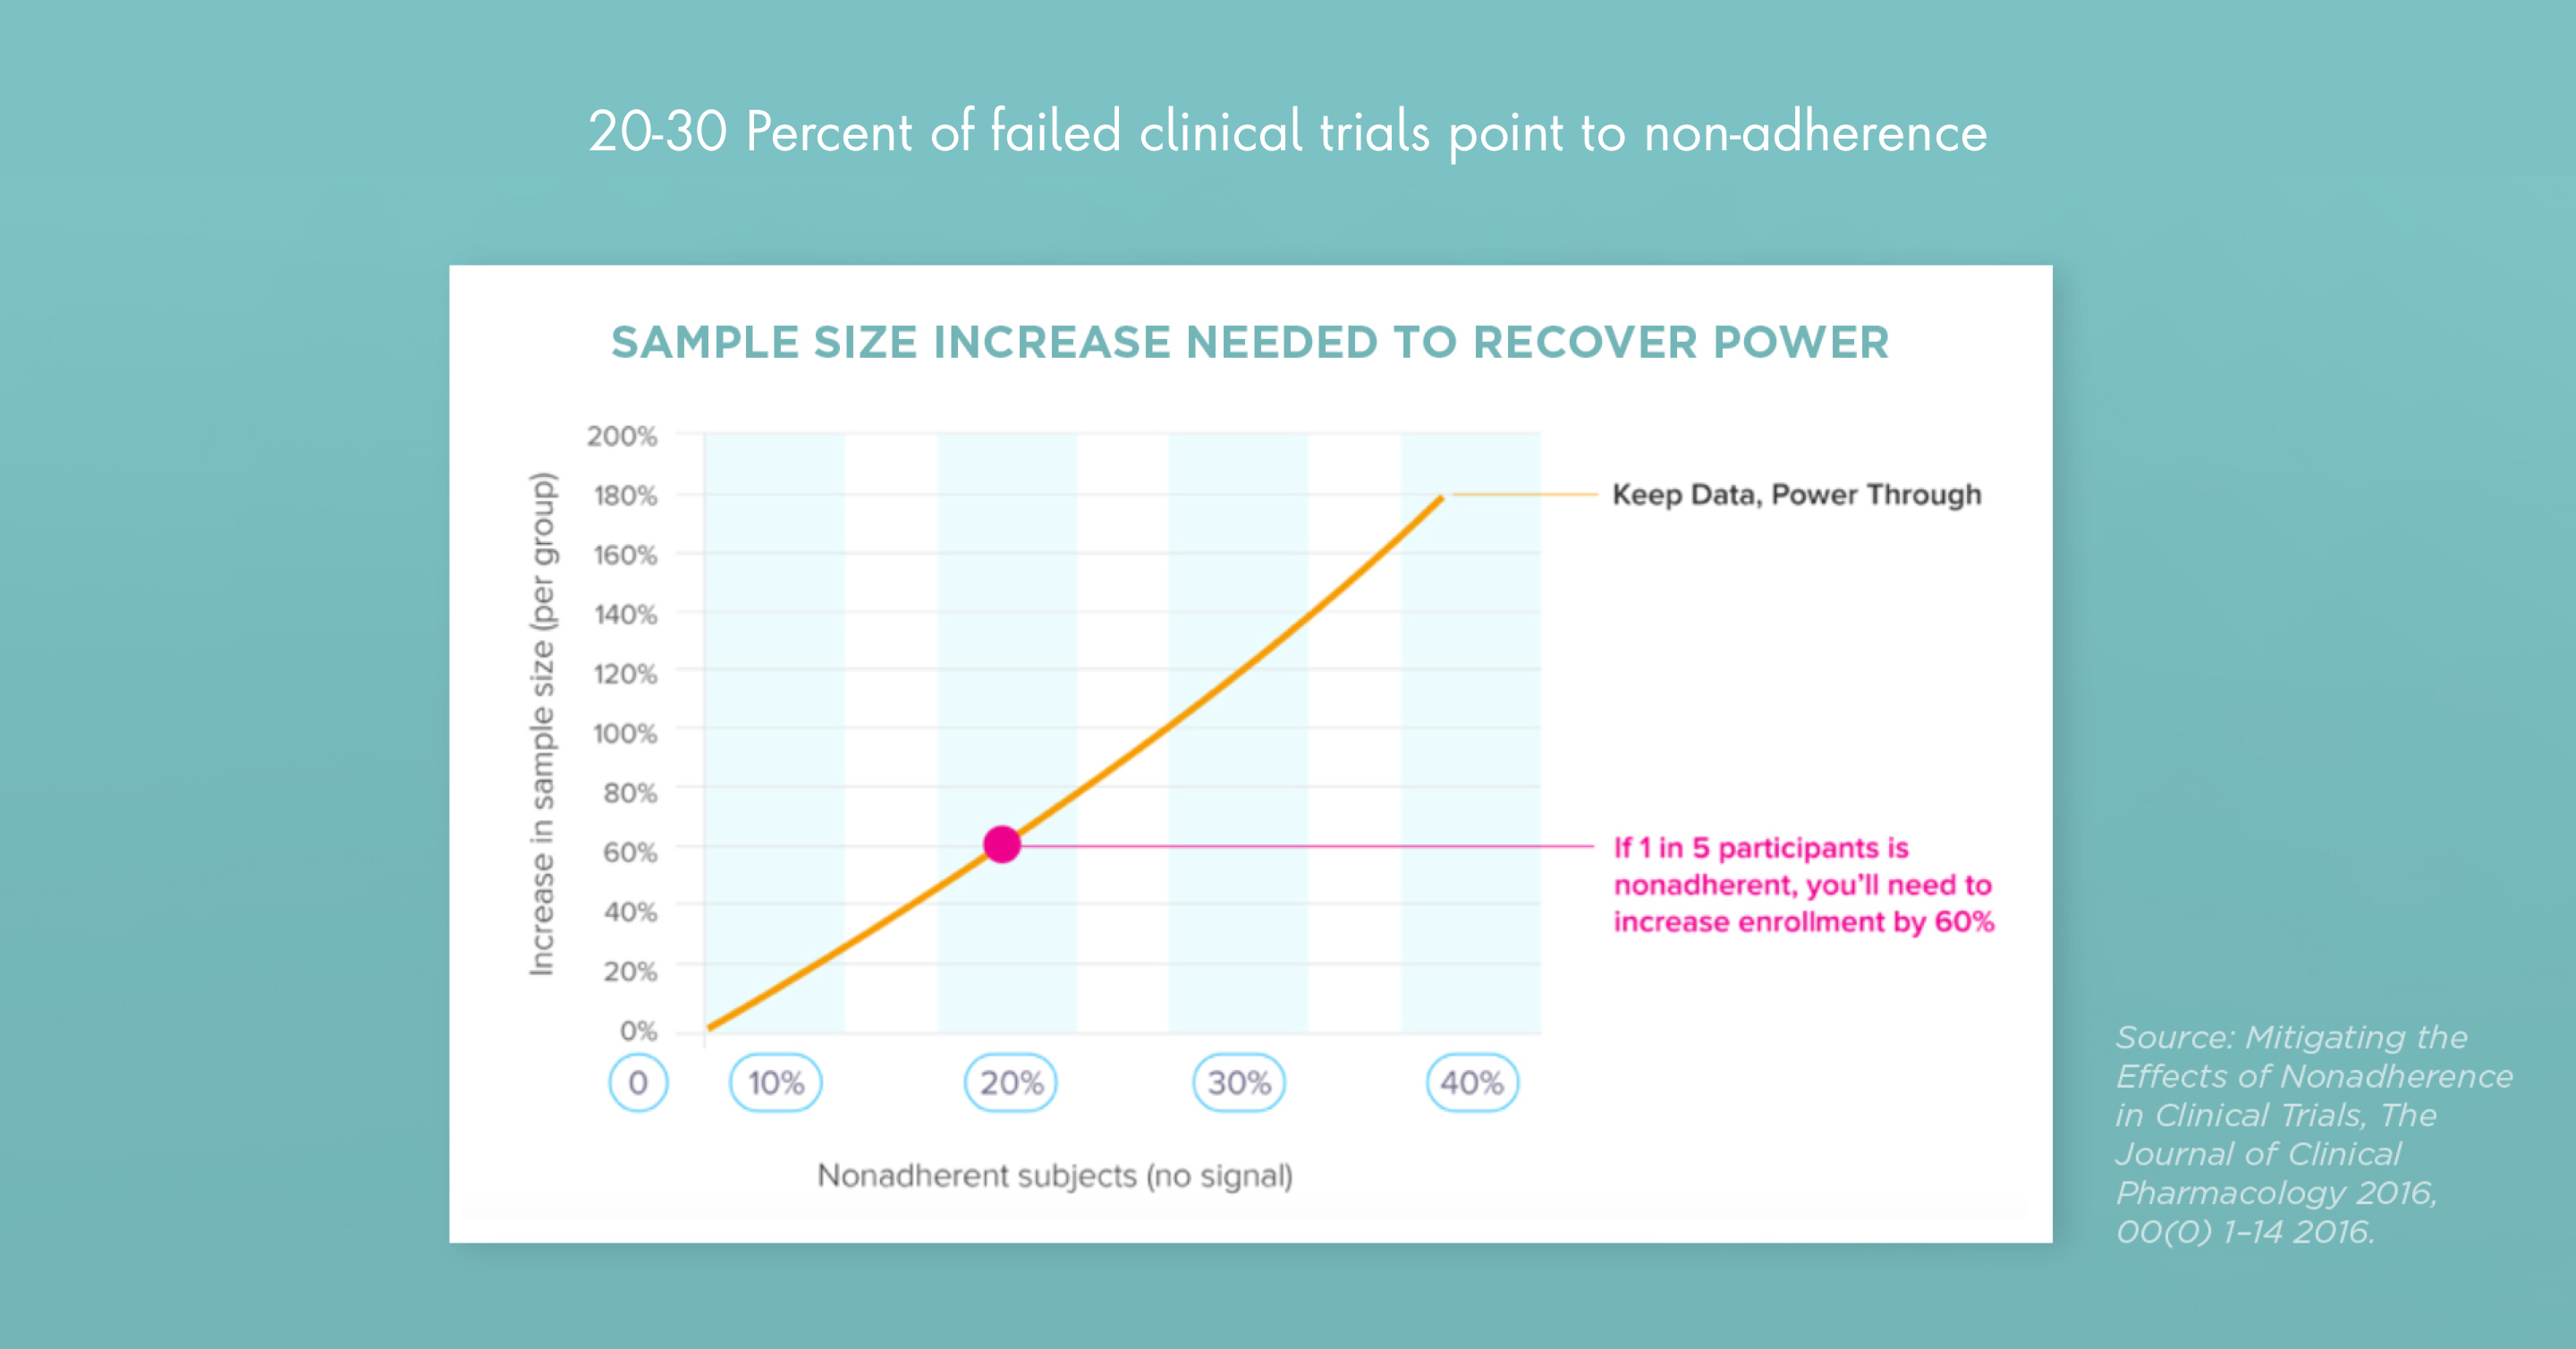 20-30 PERCENT OF FAILED CLINICAL TRIALS POINT TO NON-ADHERENCE.